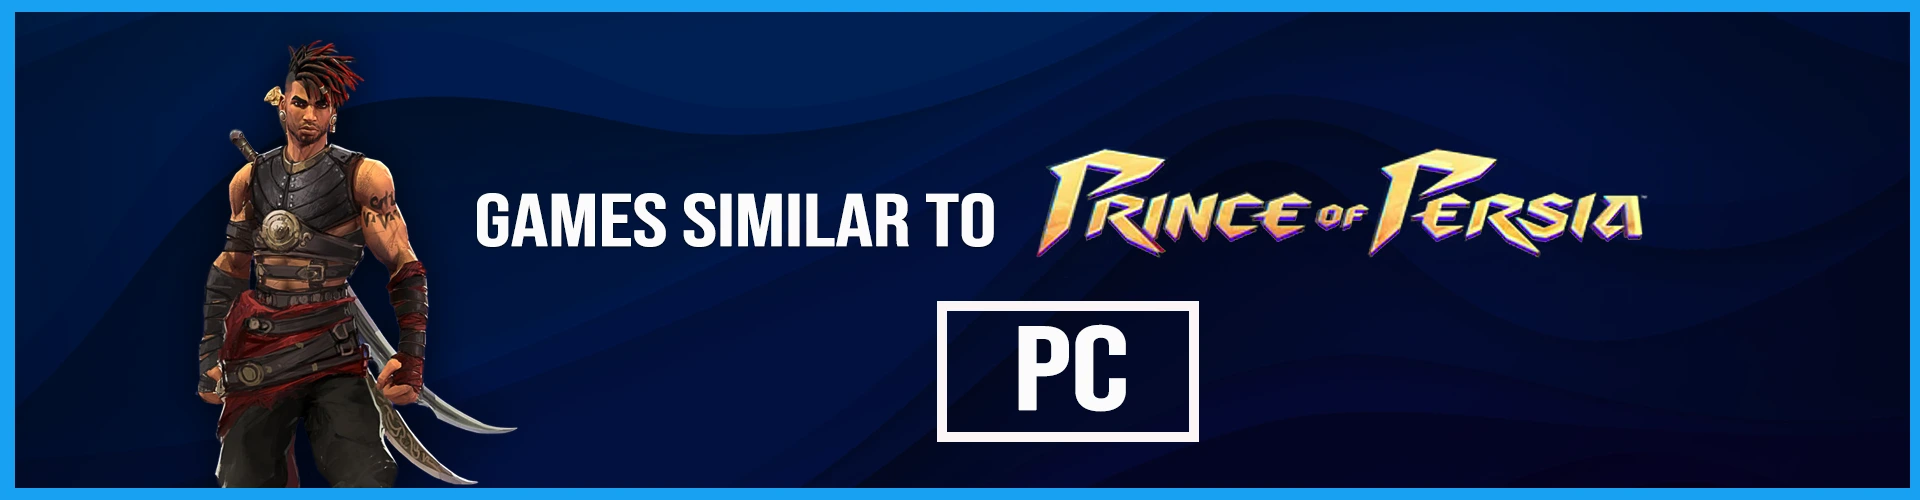 The Best Games Similar to Prince of Persia on PC